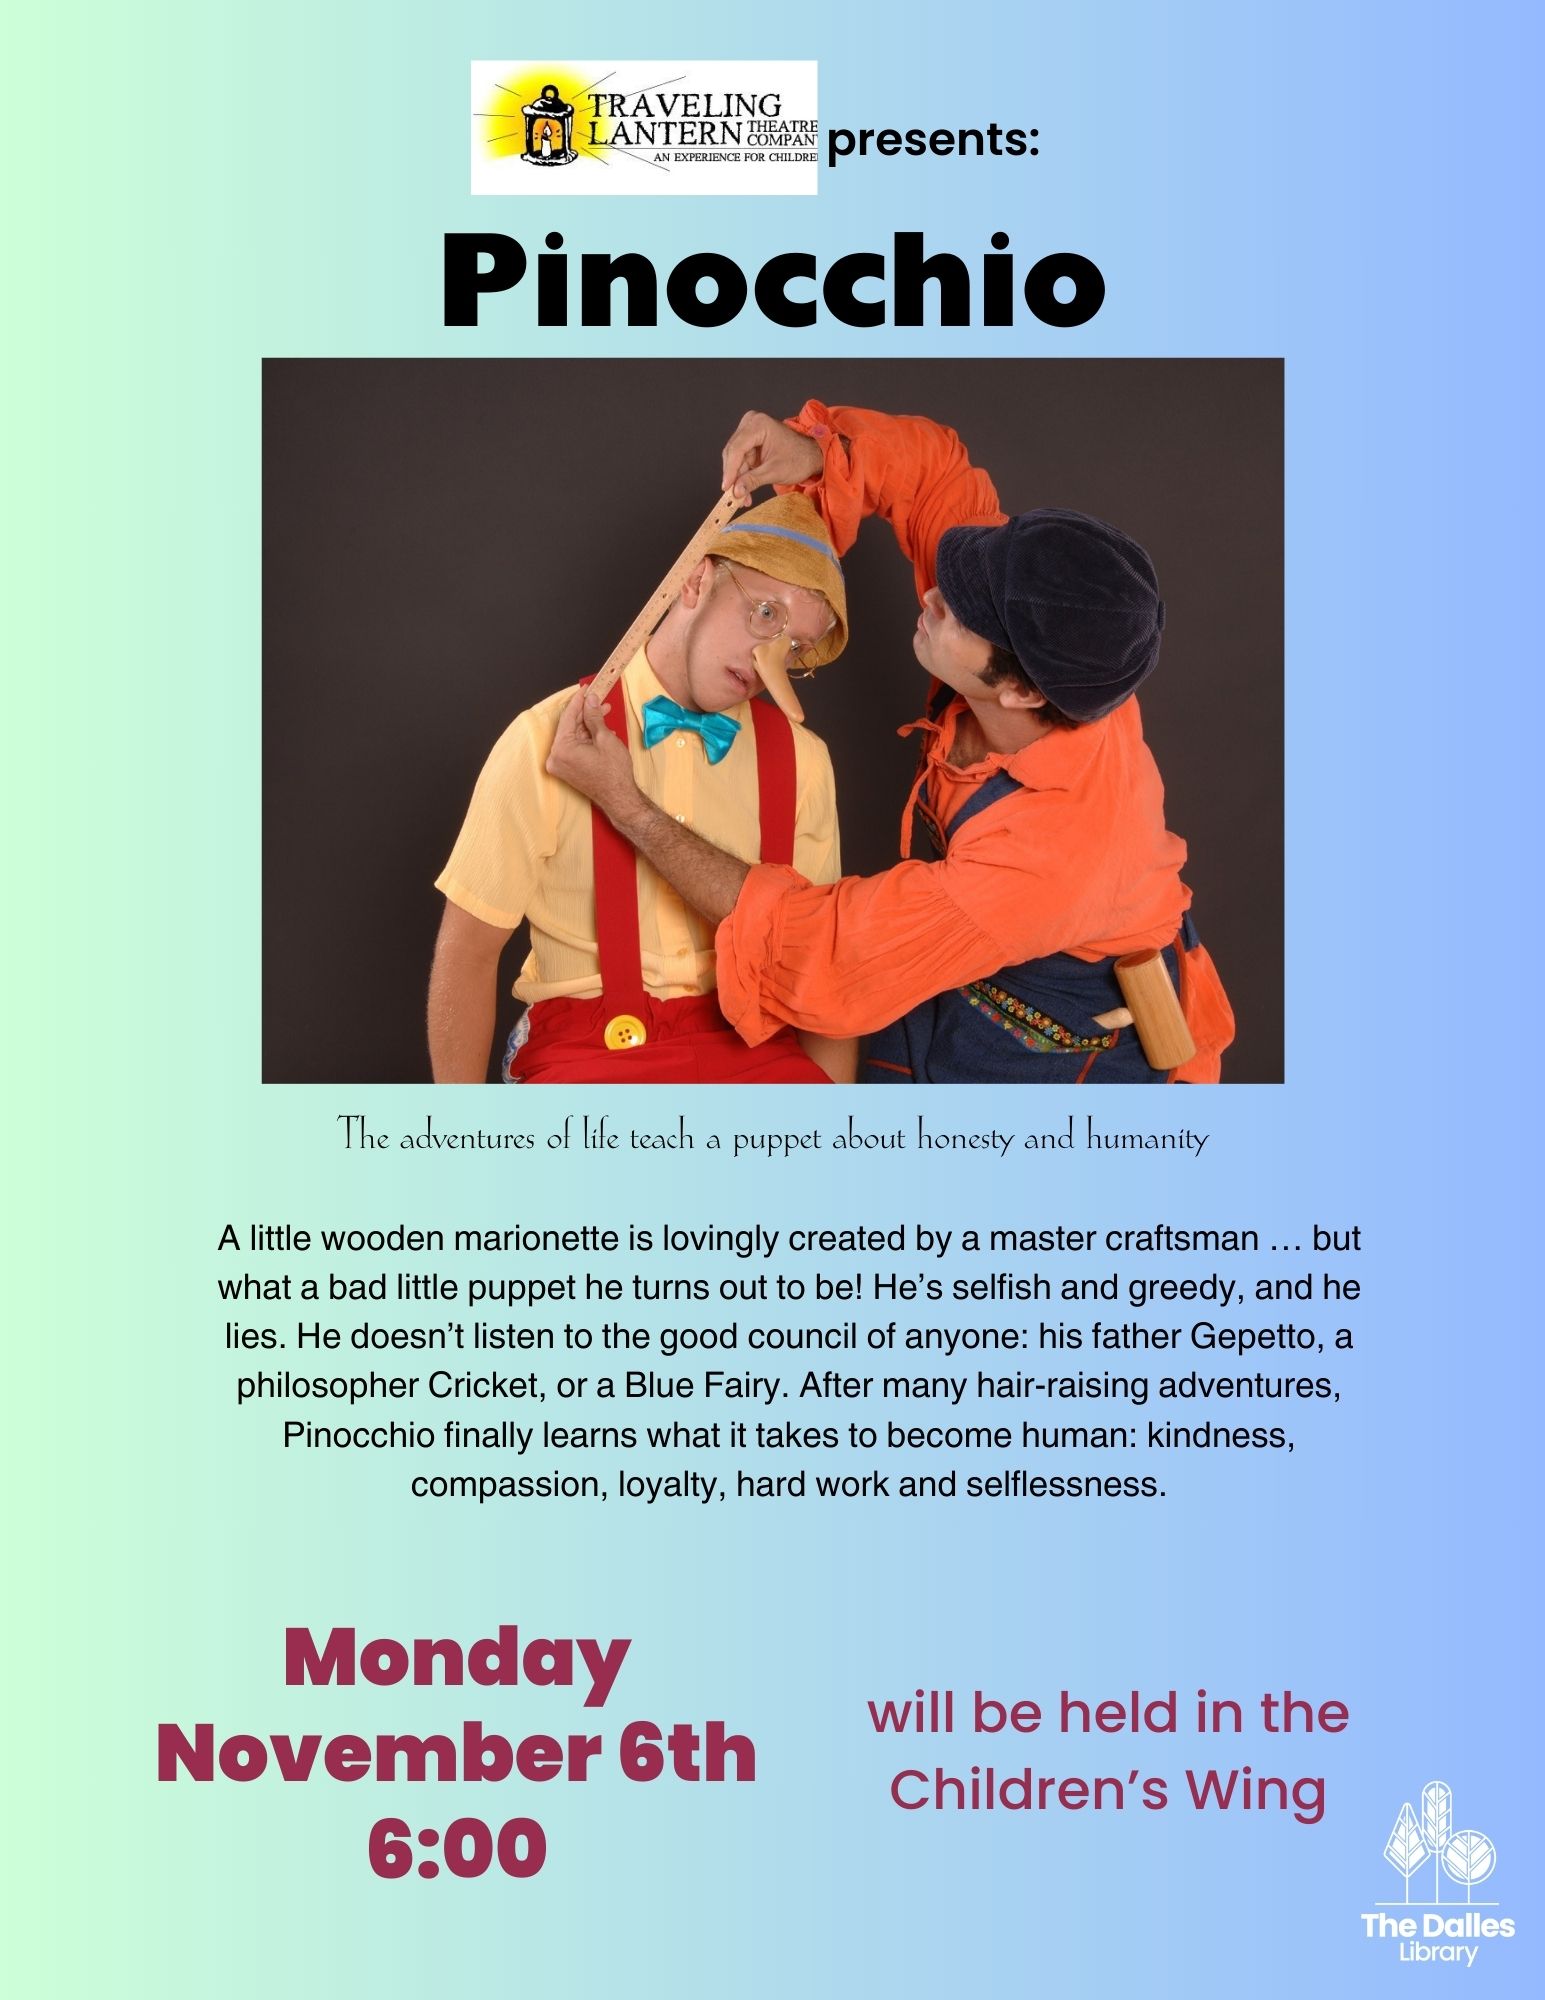 the story of Pinocchio, as told by Traveling Lantern Theater